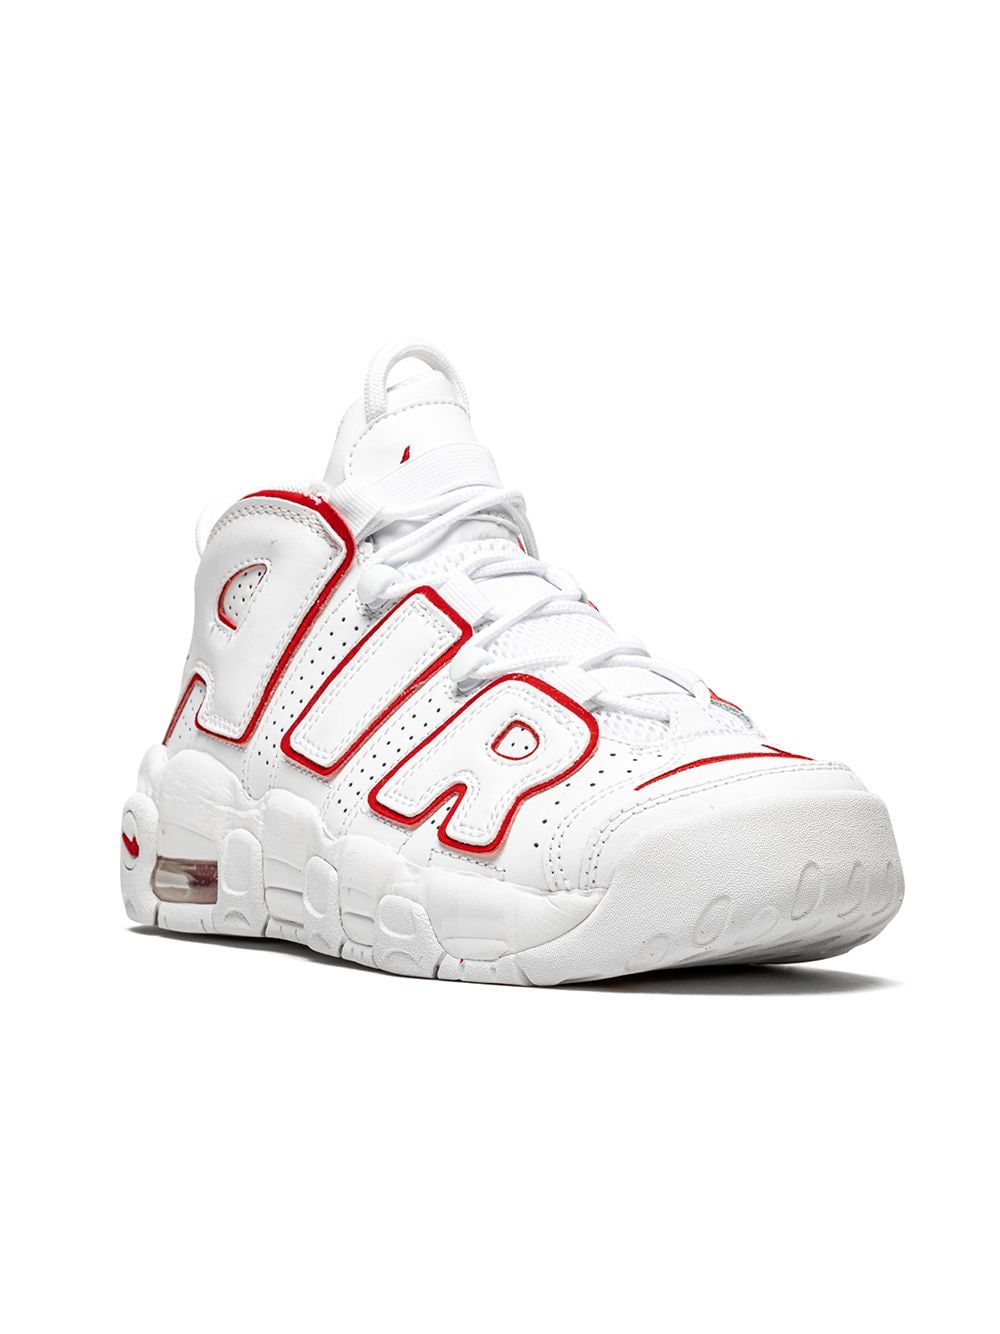 Image 1 of Nike Kids Nike Air More Uptempo "White/Varsity Red" sneakers